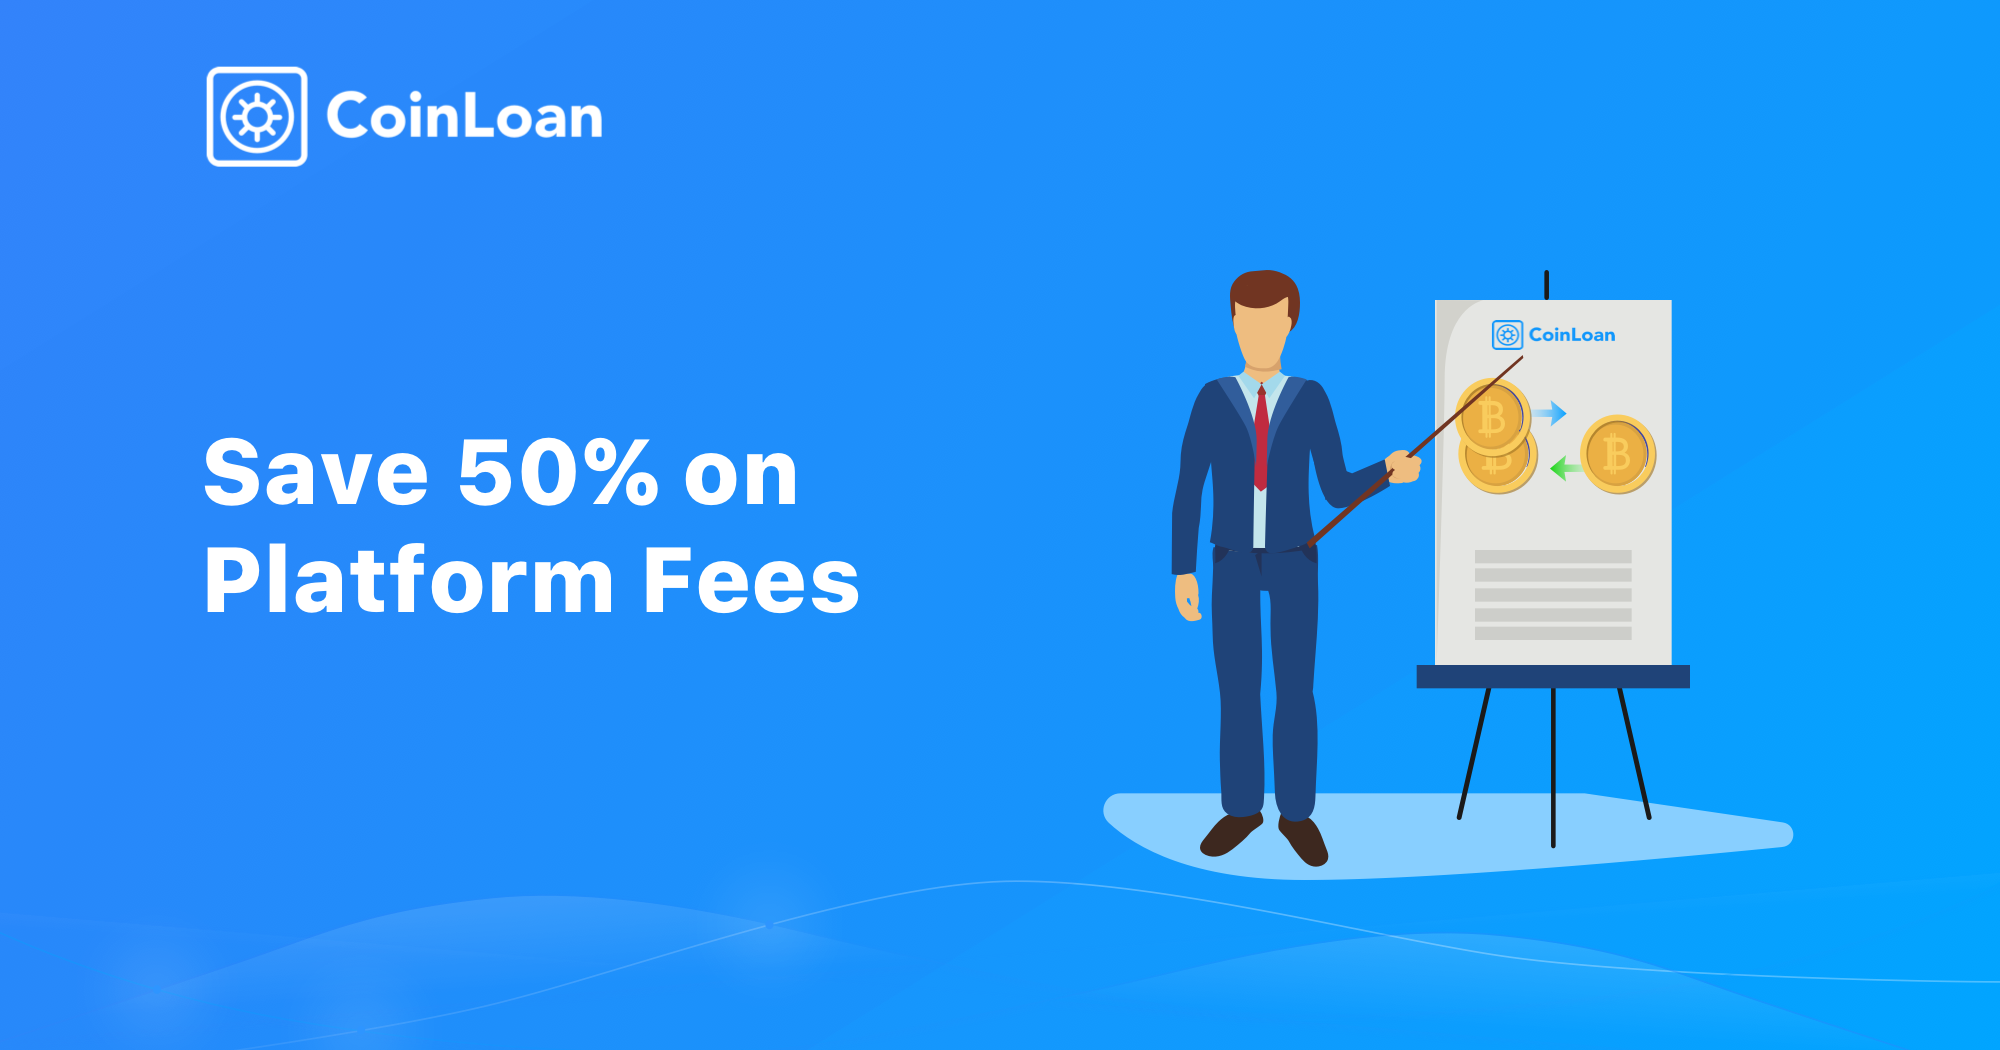 New Fees Structure at CoinLoan Explained